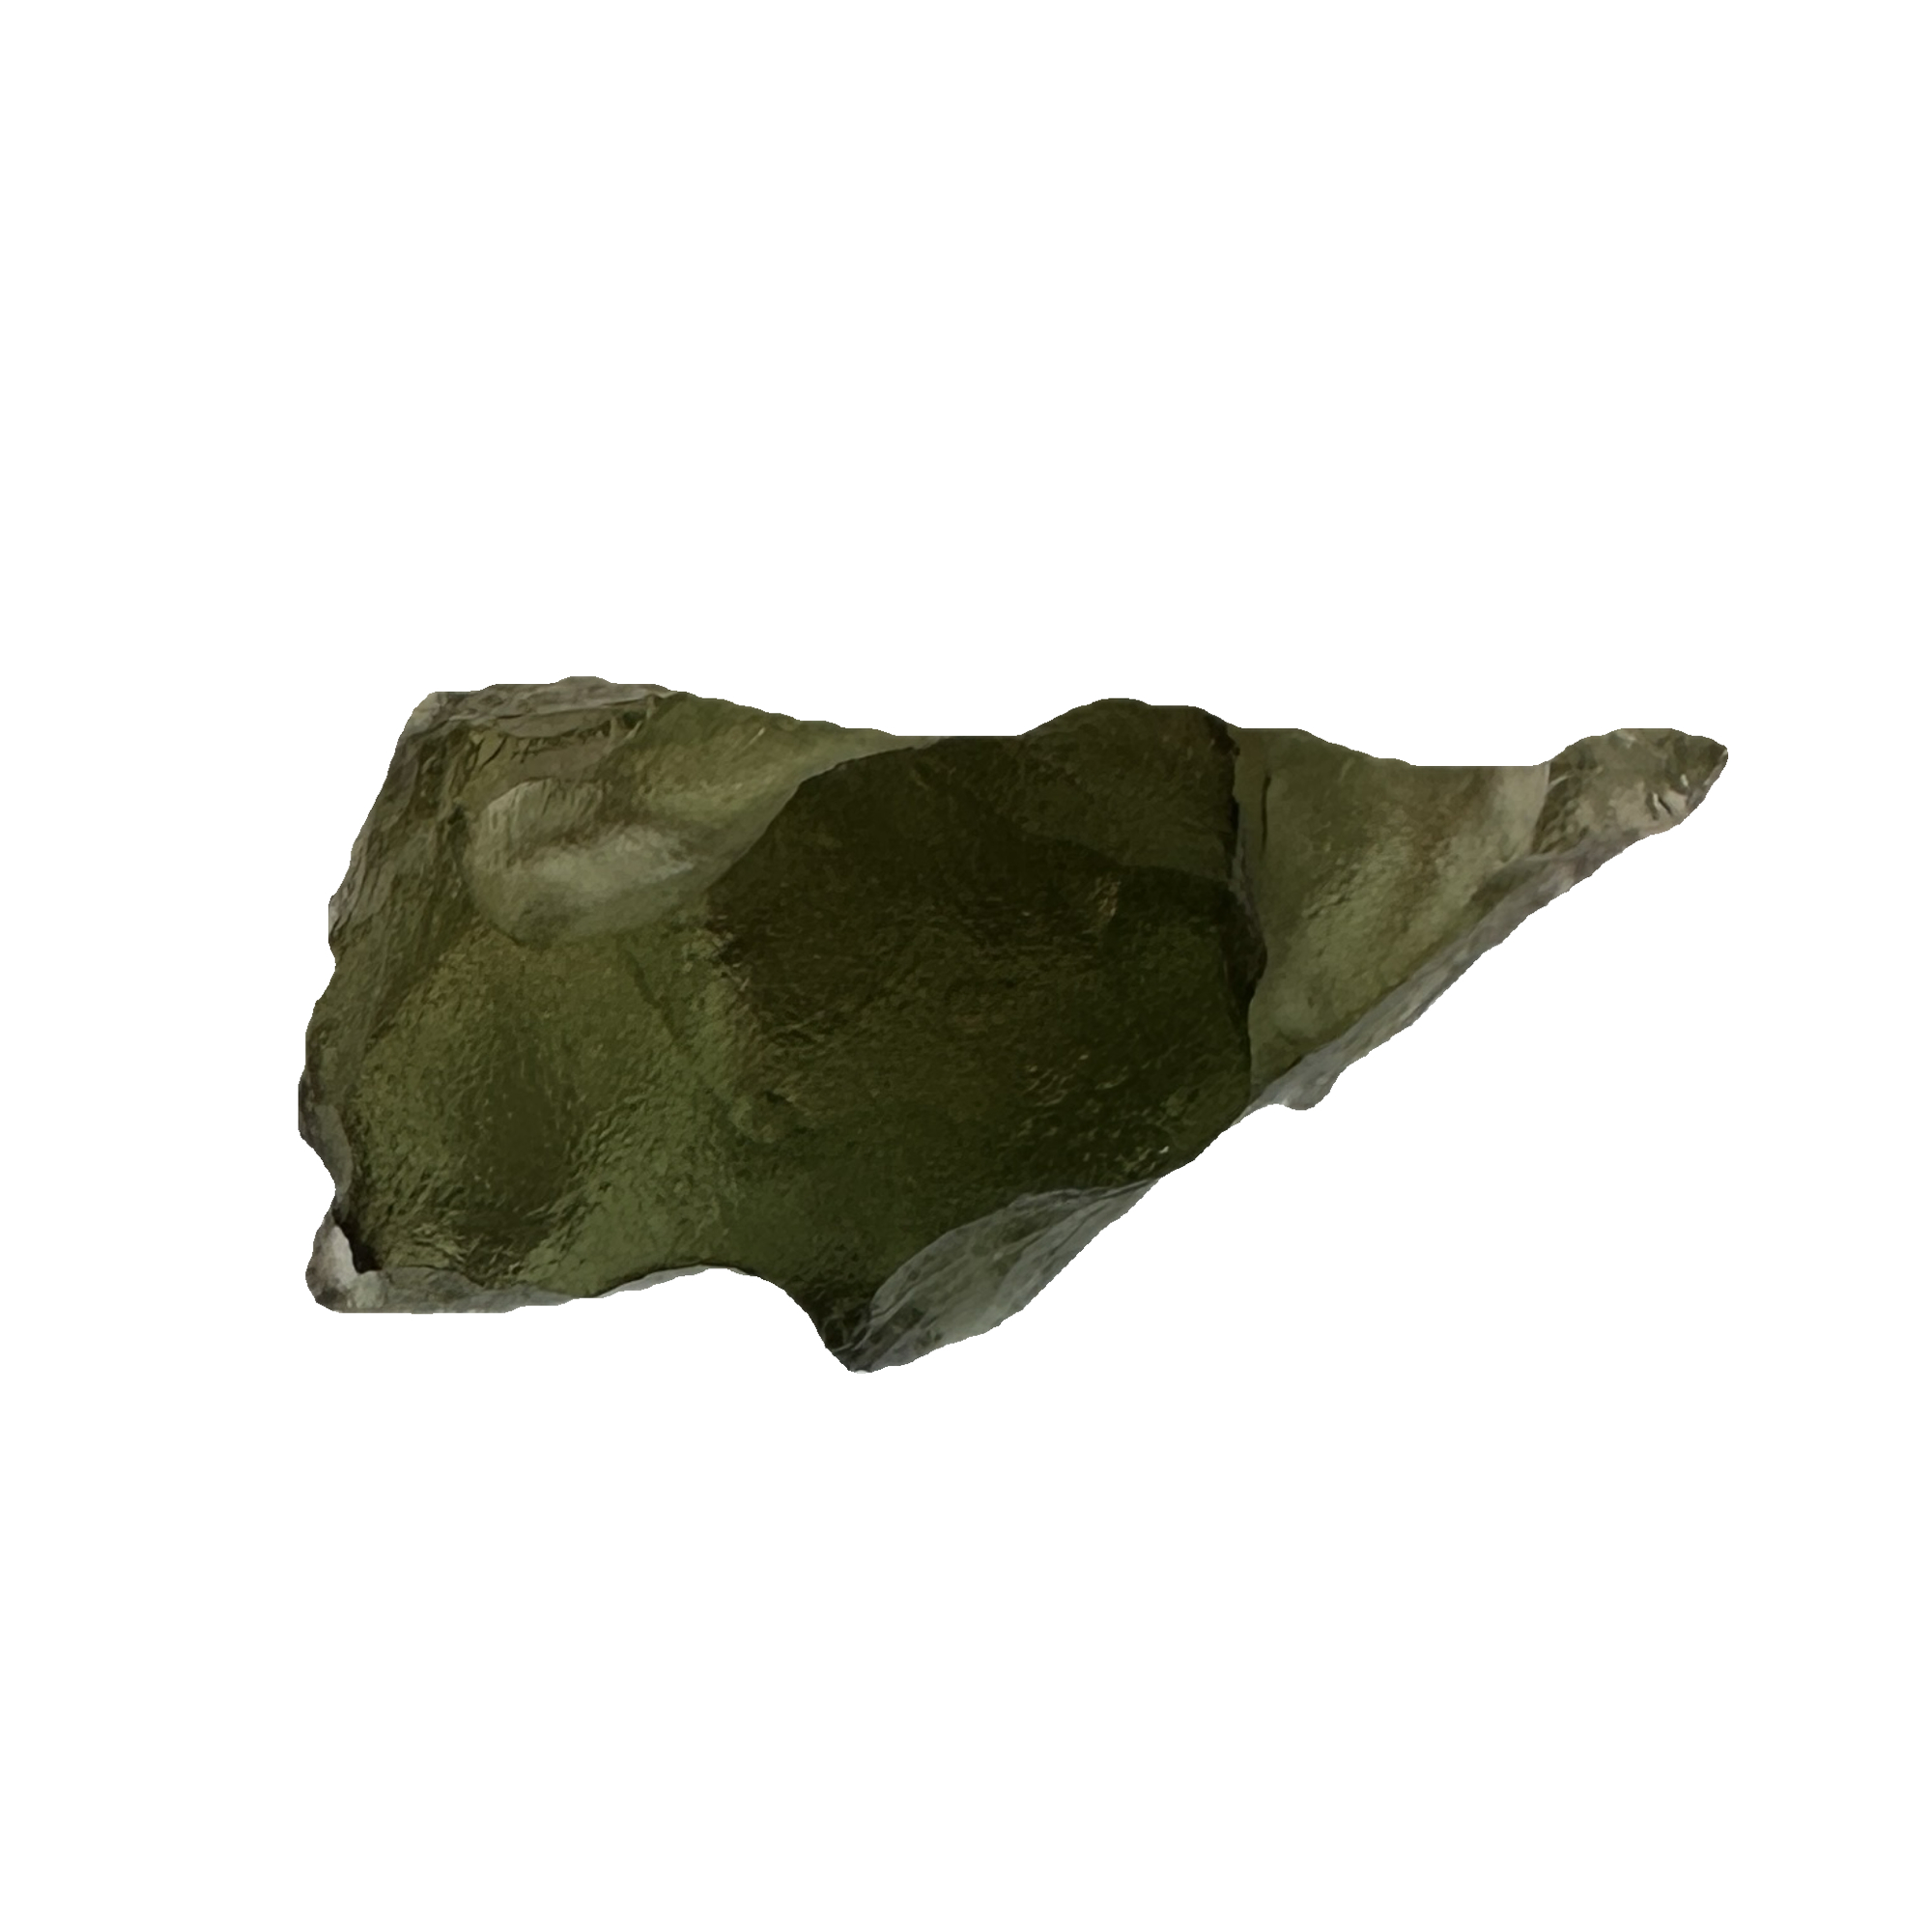 This Moldavite is a very high-grade, guaranteed, authentic and very translucent. The inner structure of this tektite is incredible